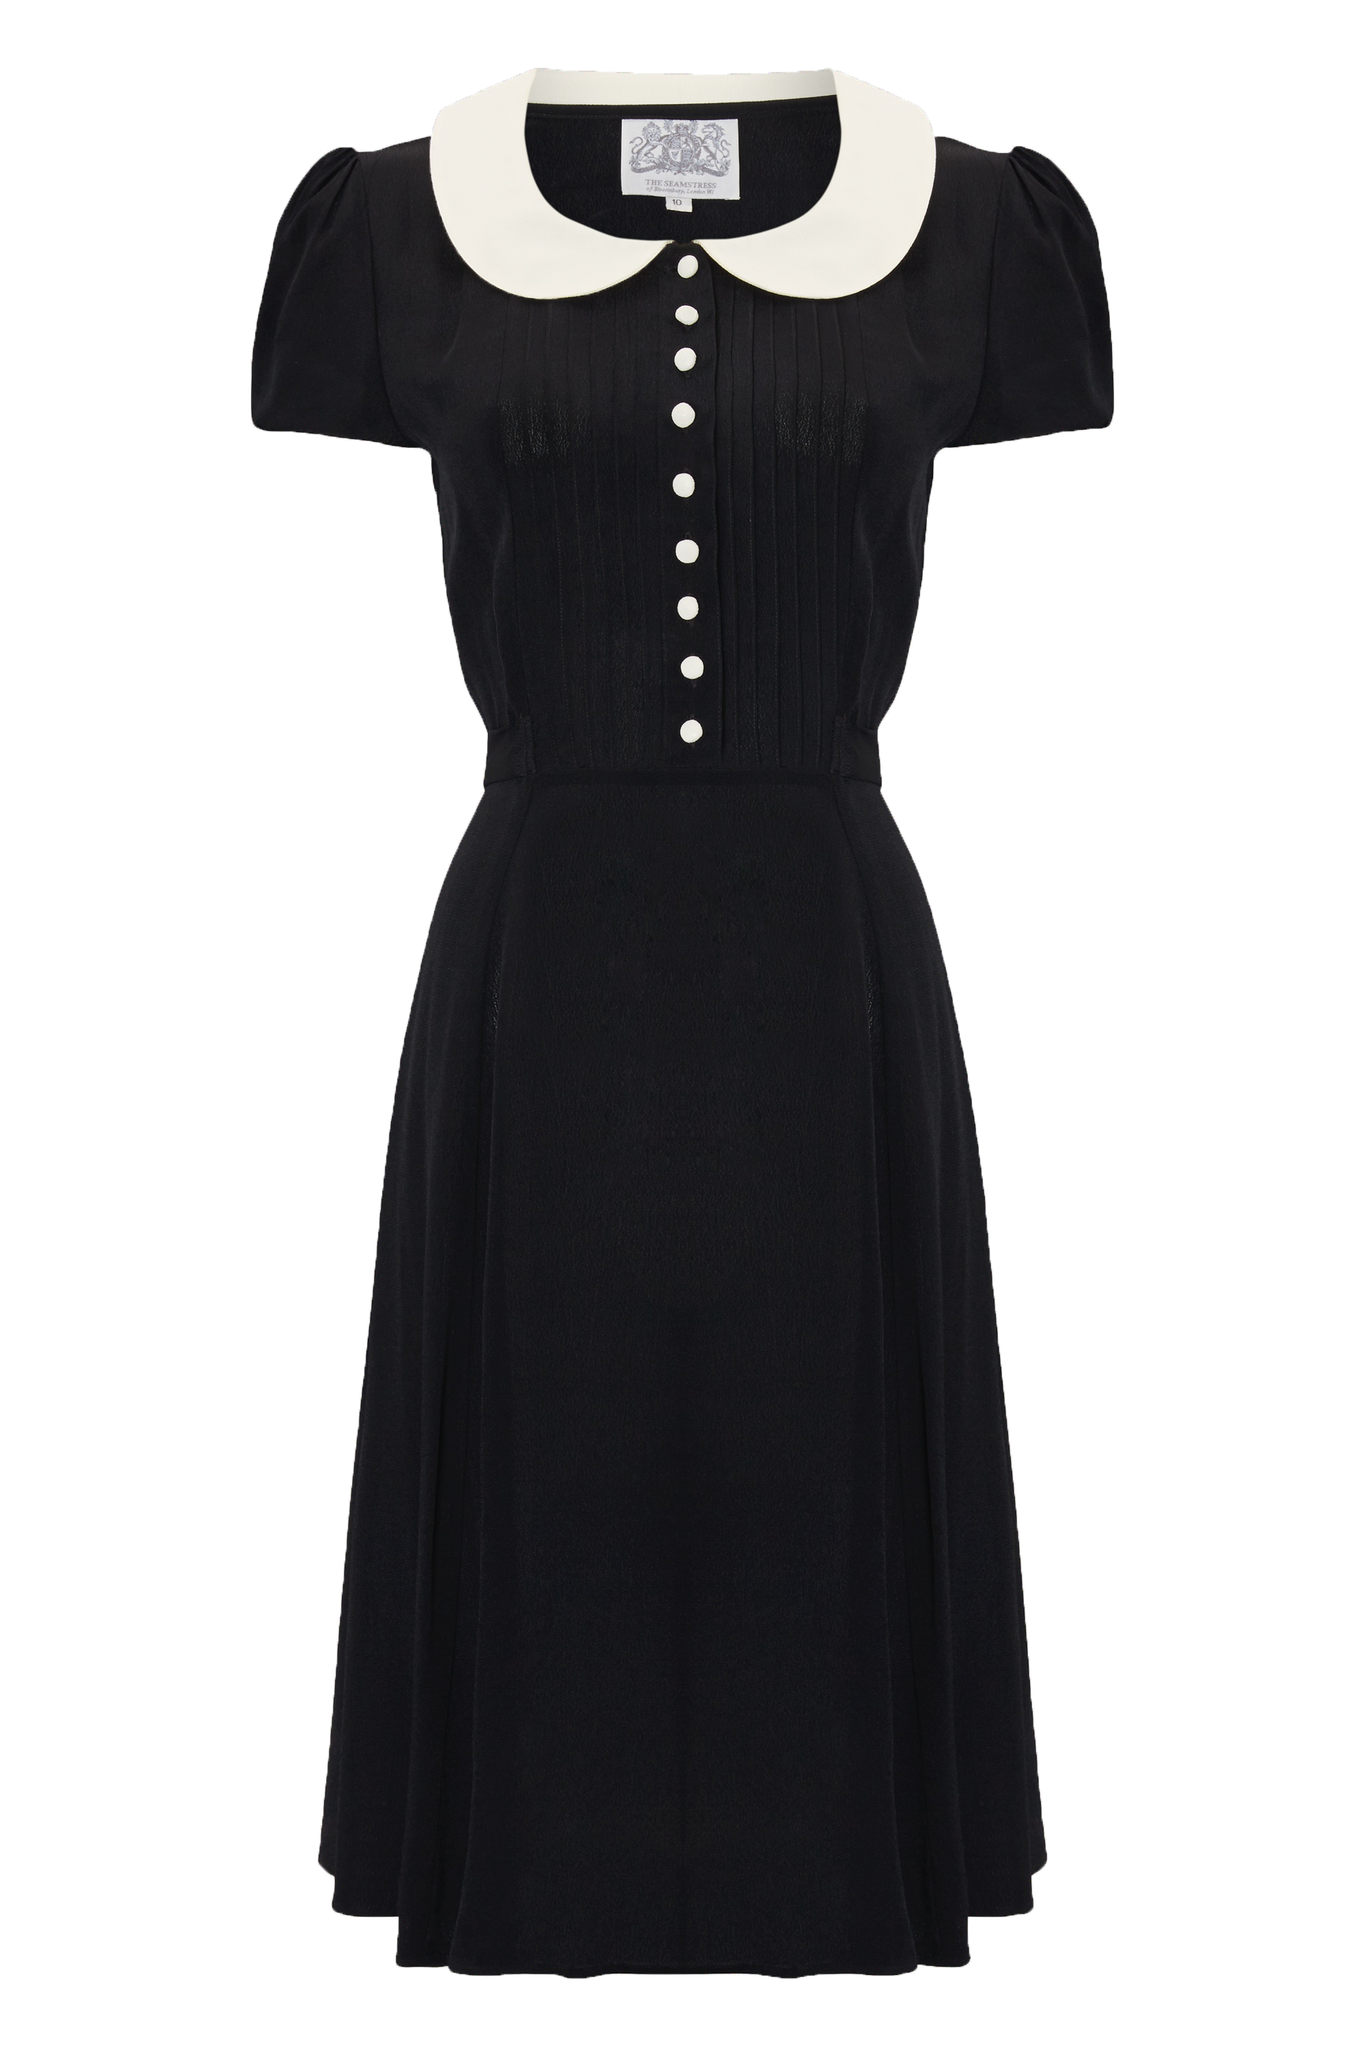 "Dorothy" Dress in Black with Contrast Collar, Classic 1940s Vintage Style - CC41, Goodwood Revival, Twinwood Festival, Viva Las Vegas Rockabilly Weekend Rock n Romance The Seamstress Of Bloomsbury